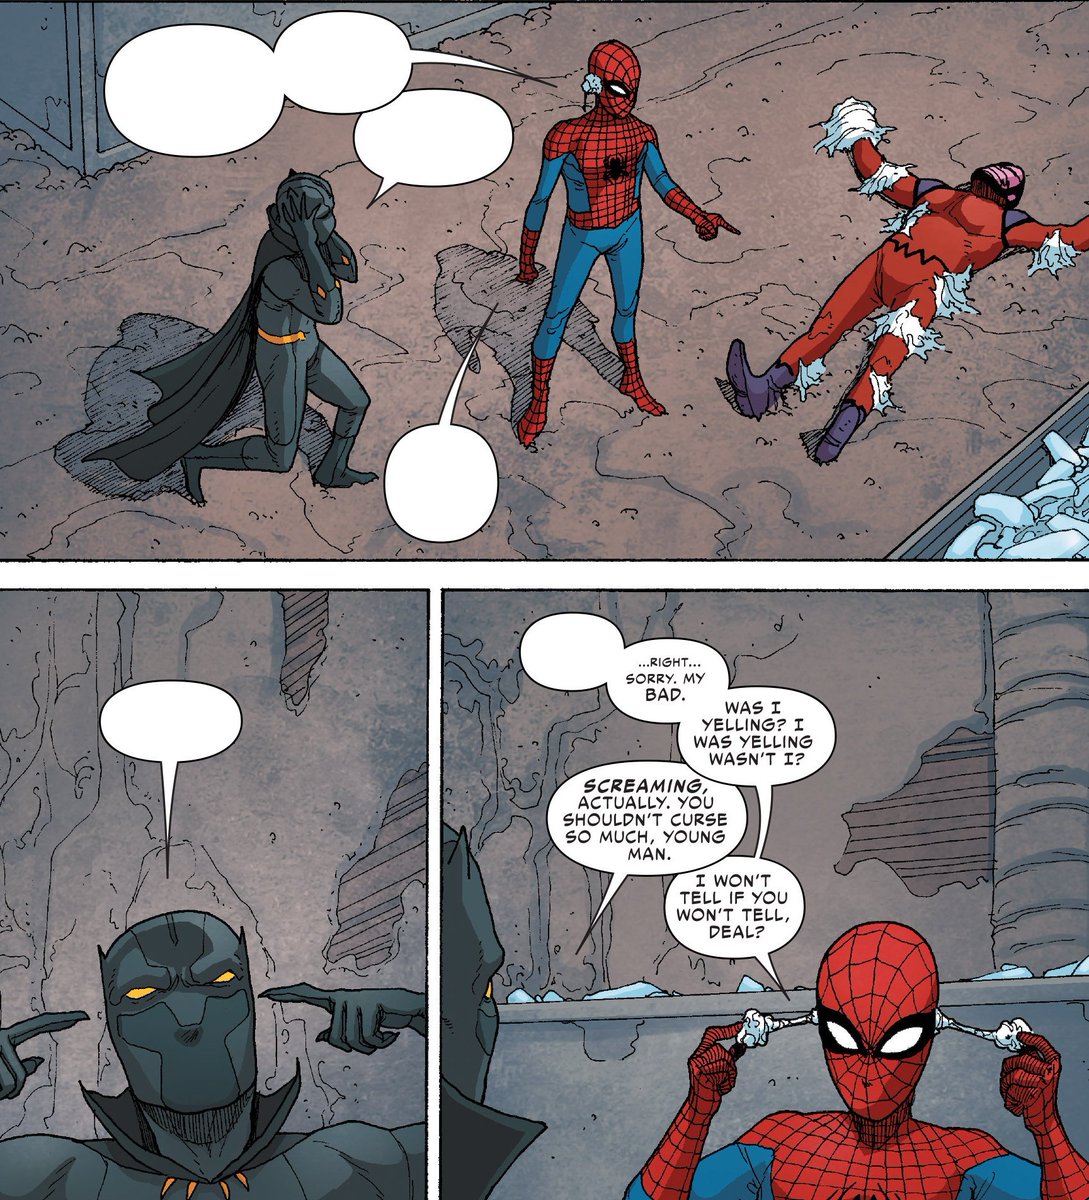 RT @ComicGirlAshley: Spider-Man cursing up a storm is a hilarious image https://t.co/xHH0eSjLFp